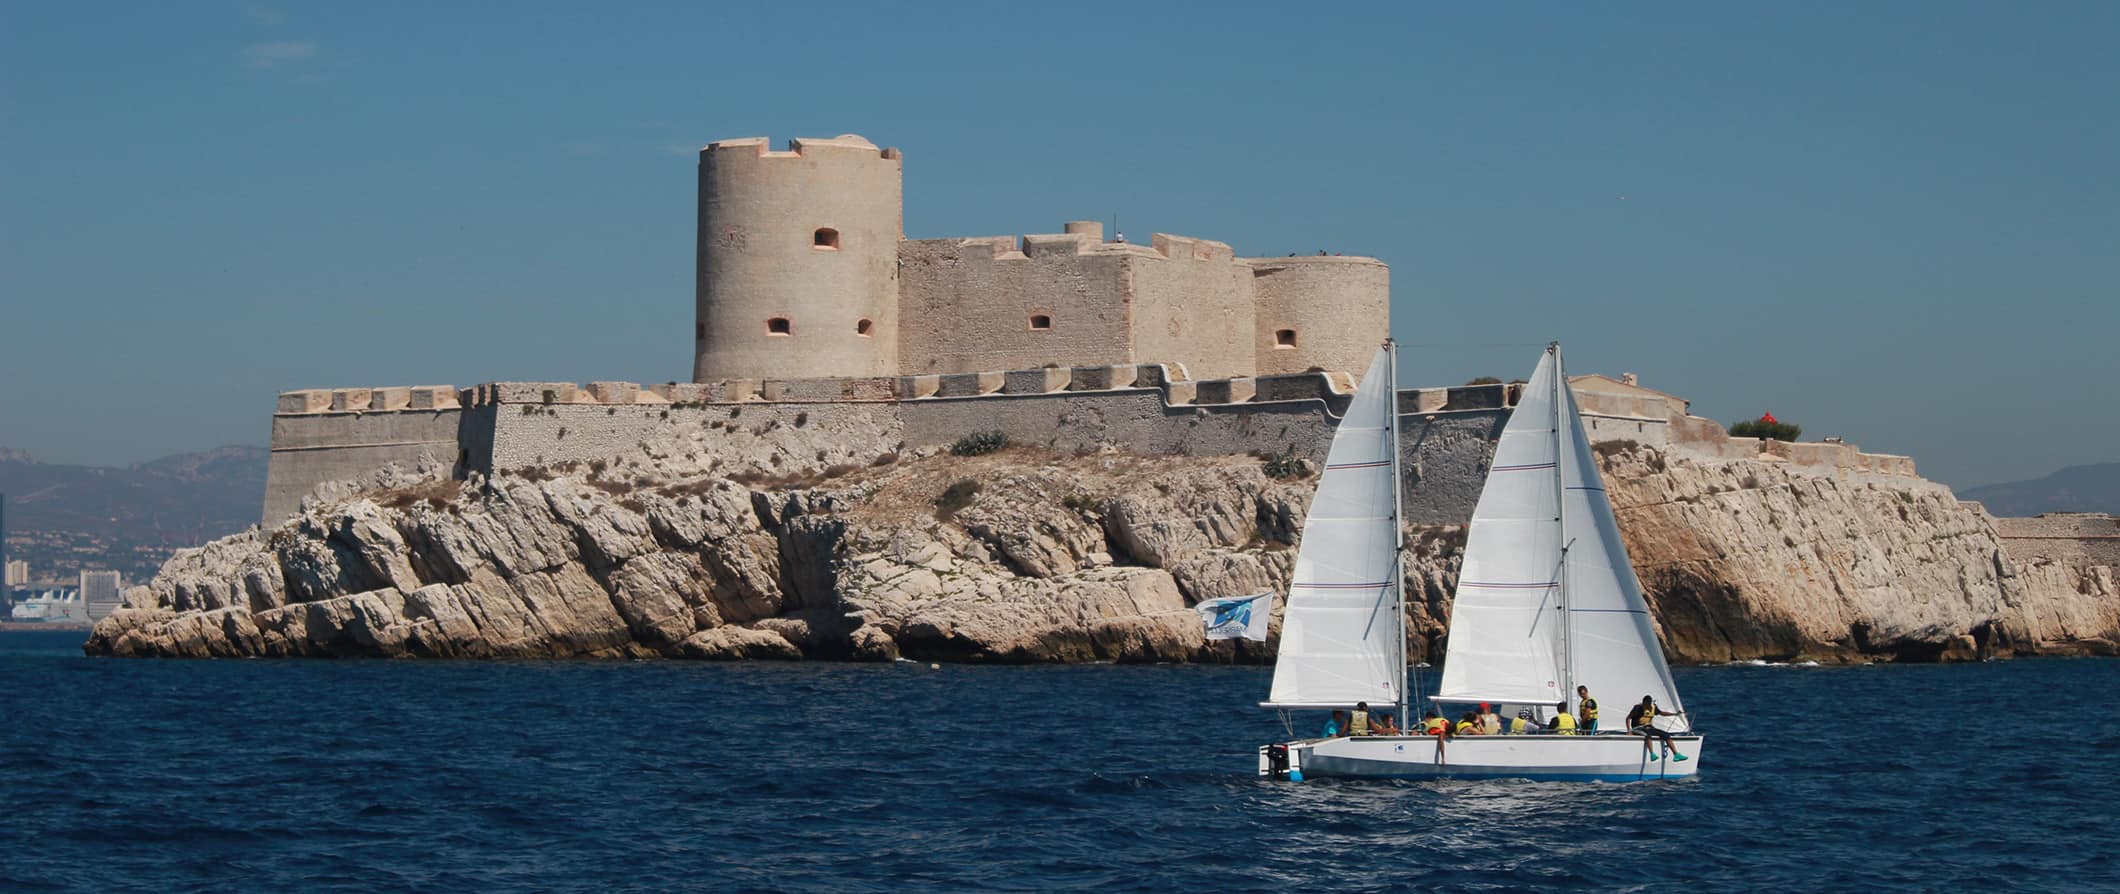 A small sailboat filled with passengers passing in front of Château d’If, a fortress off the coast of Marseille